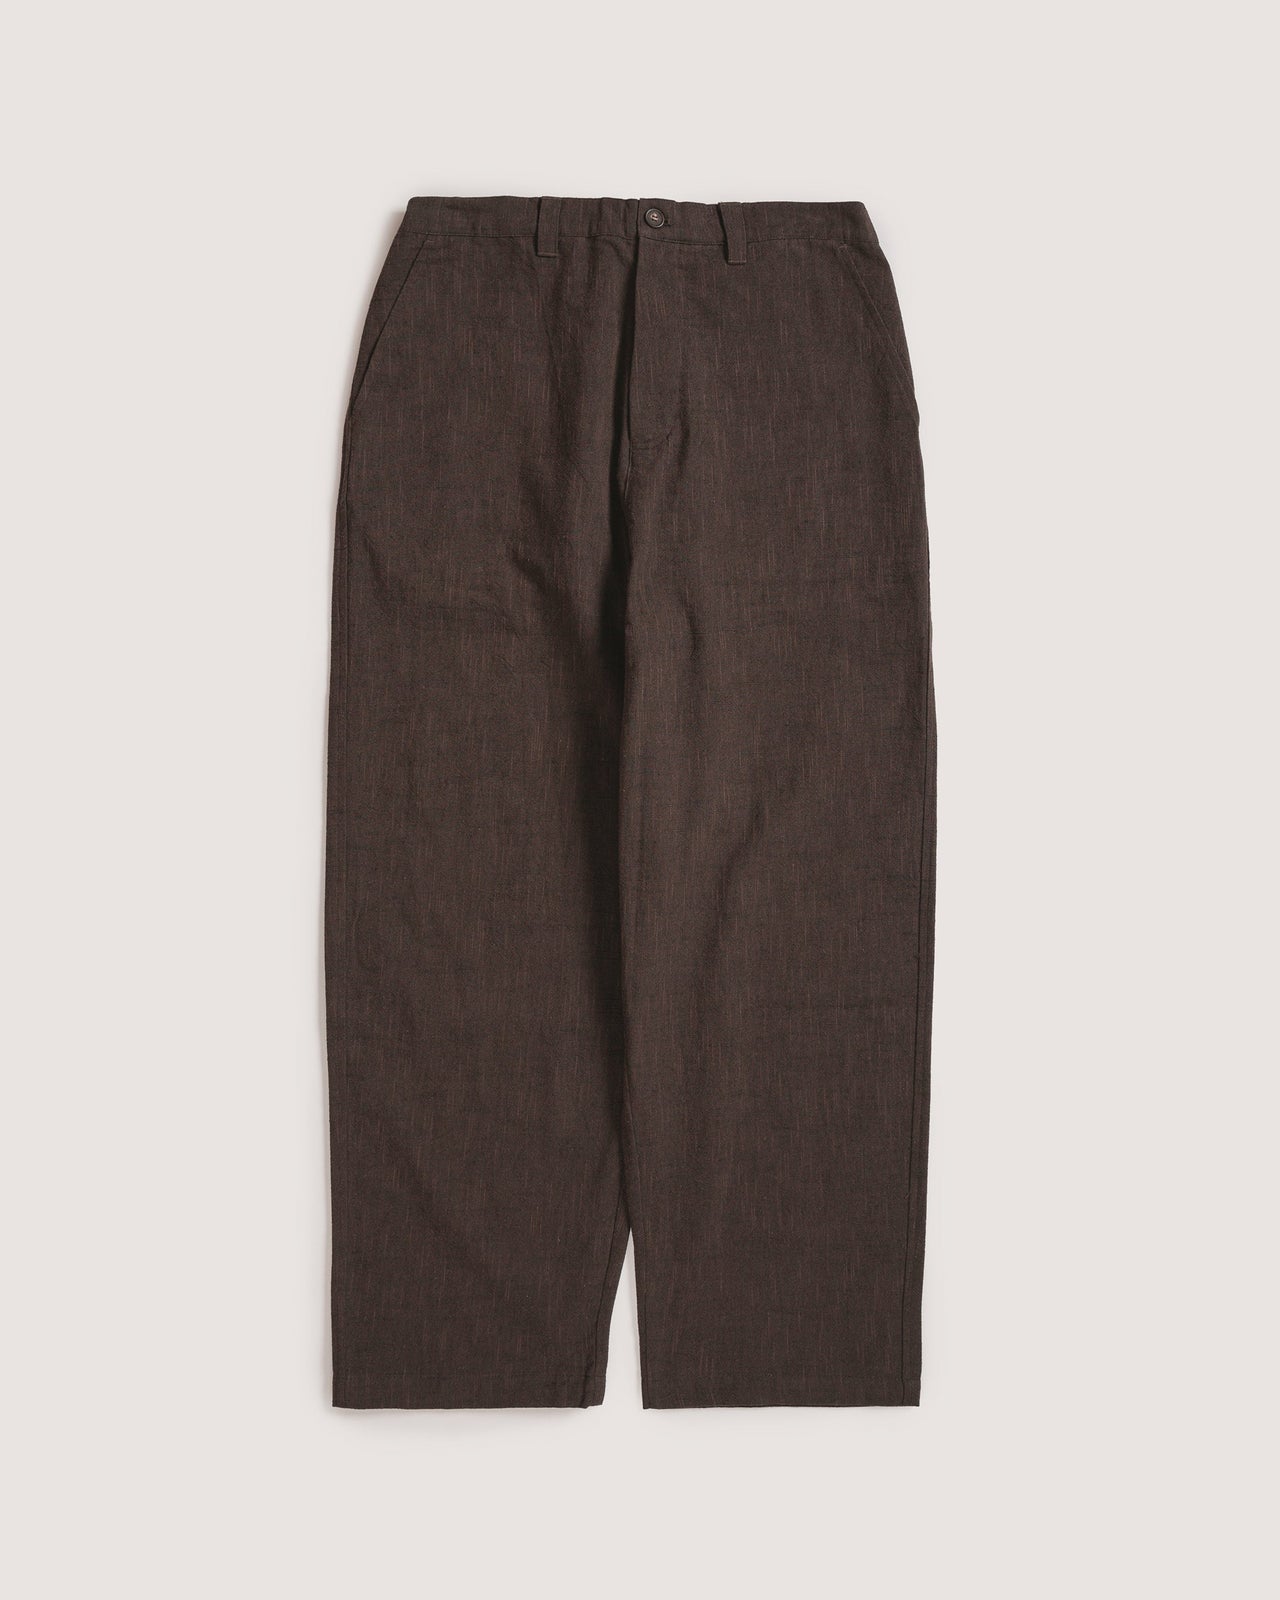 Satta | Slow Pant - Speckled Brown